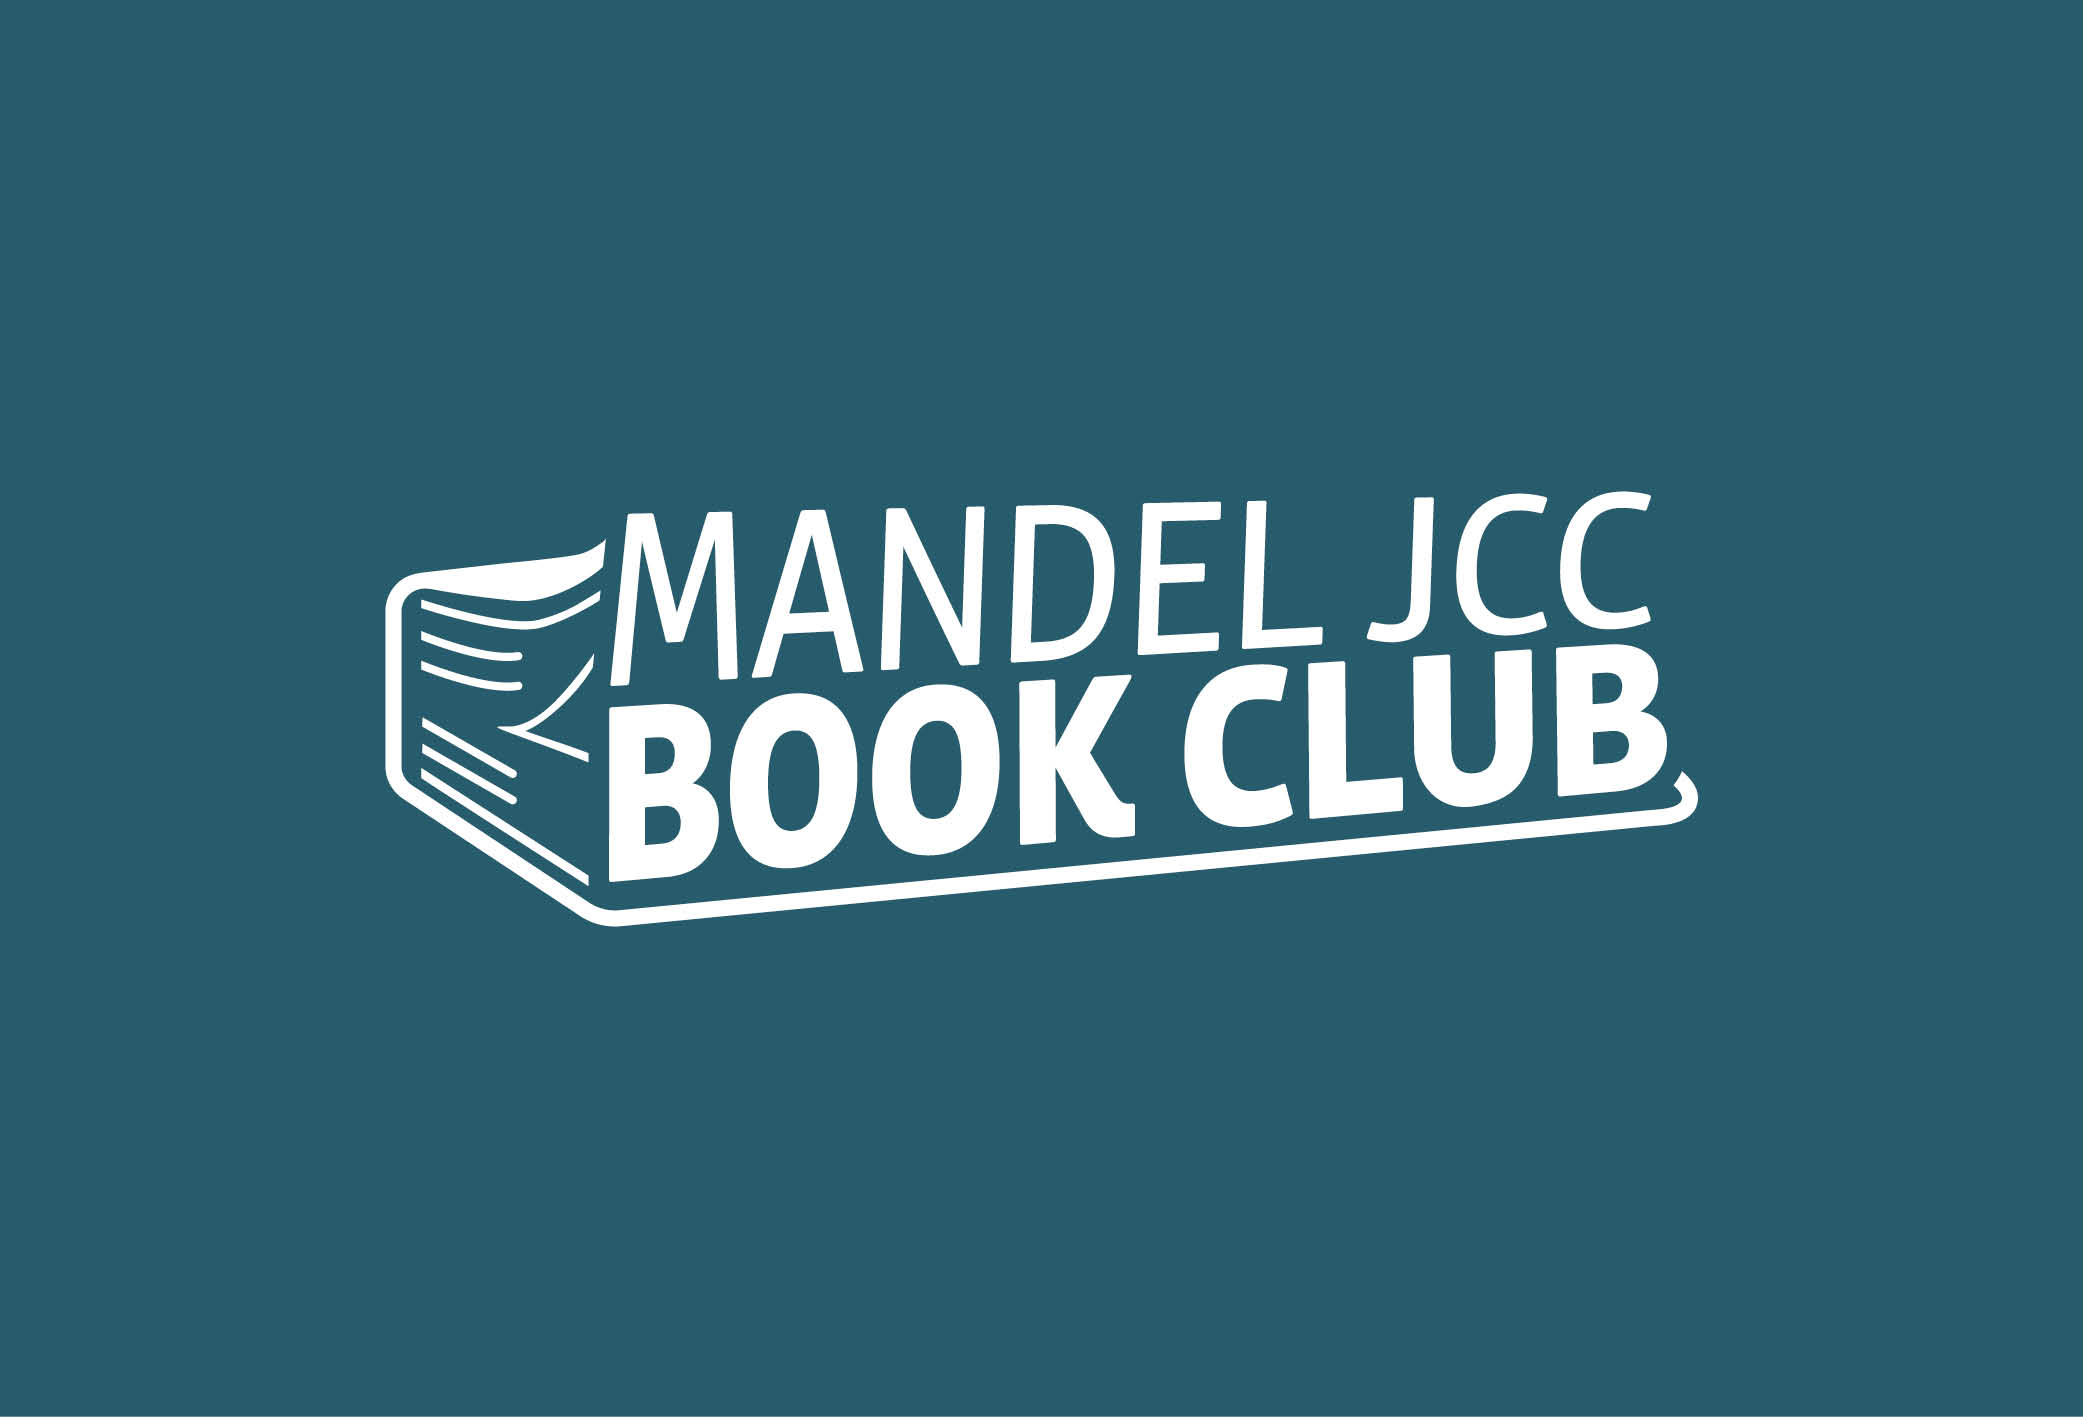 Last Tuesday of Every Month The Mandel JCC Book Club Series